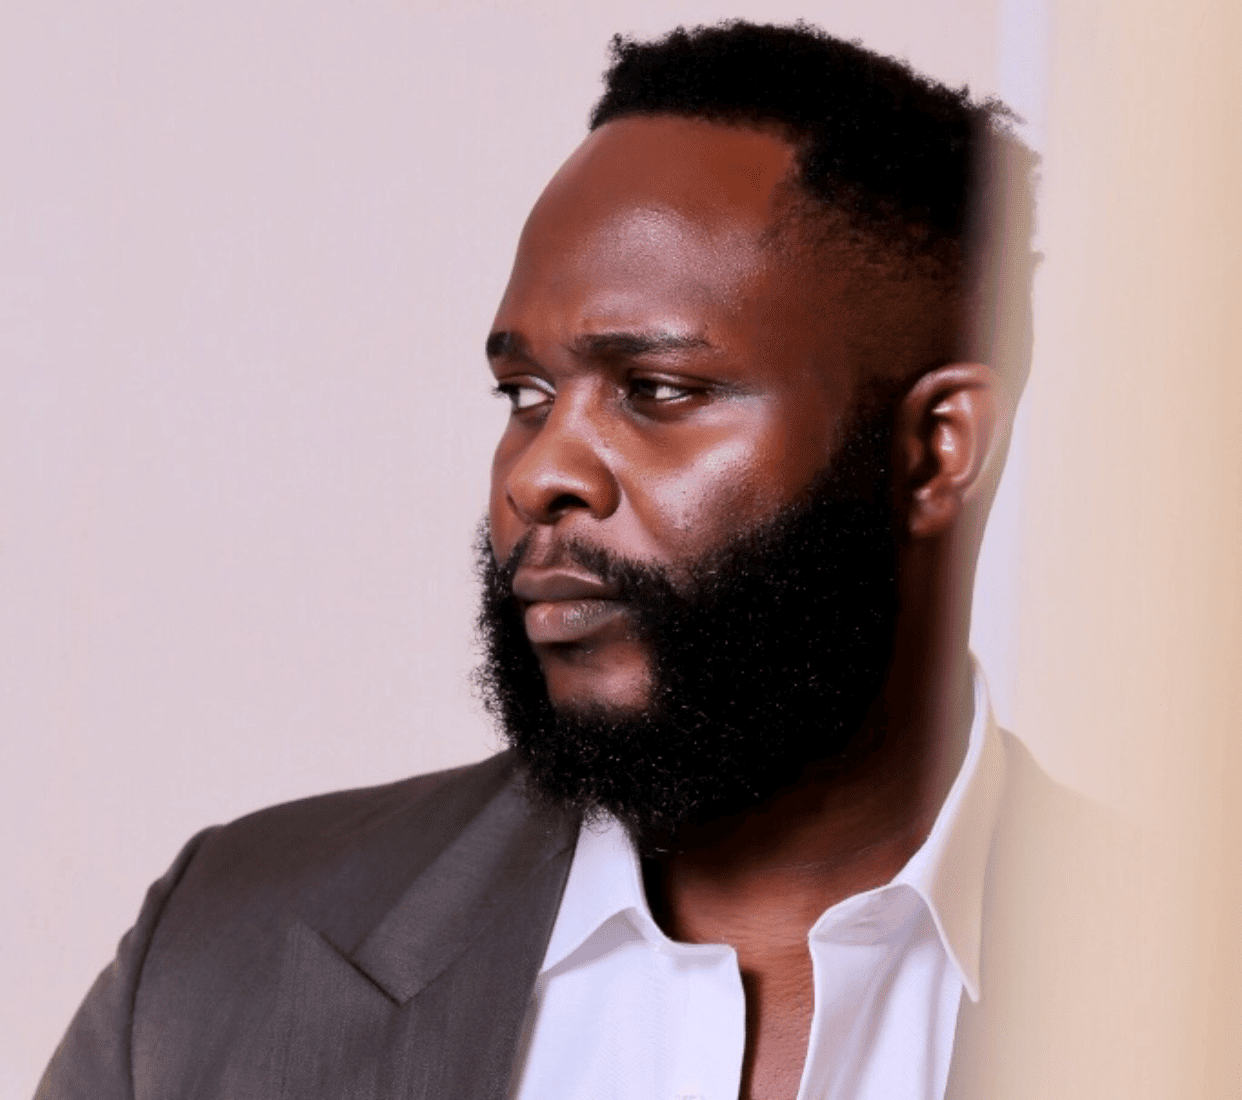 Joro Olumofin advises ladies on how to prevent ending up as a side chick